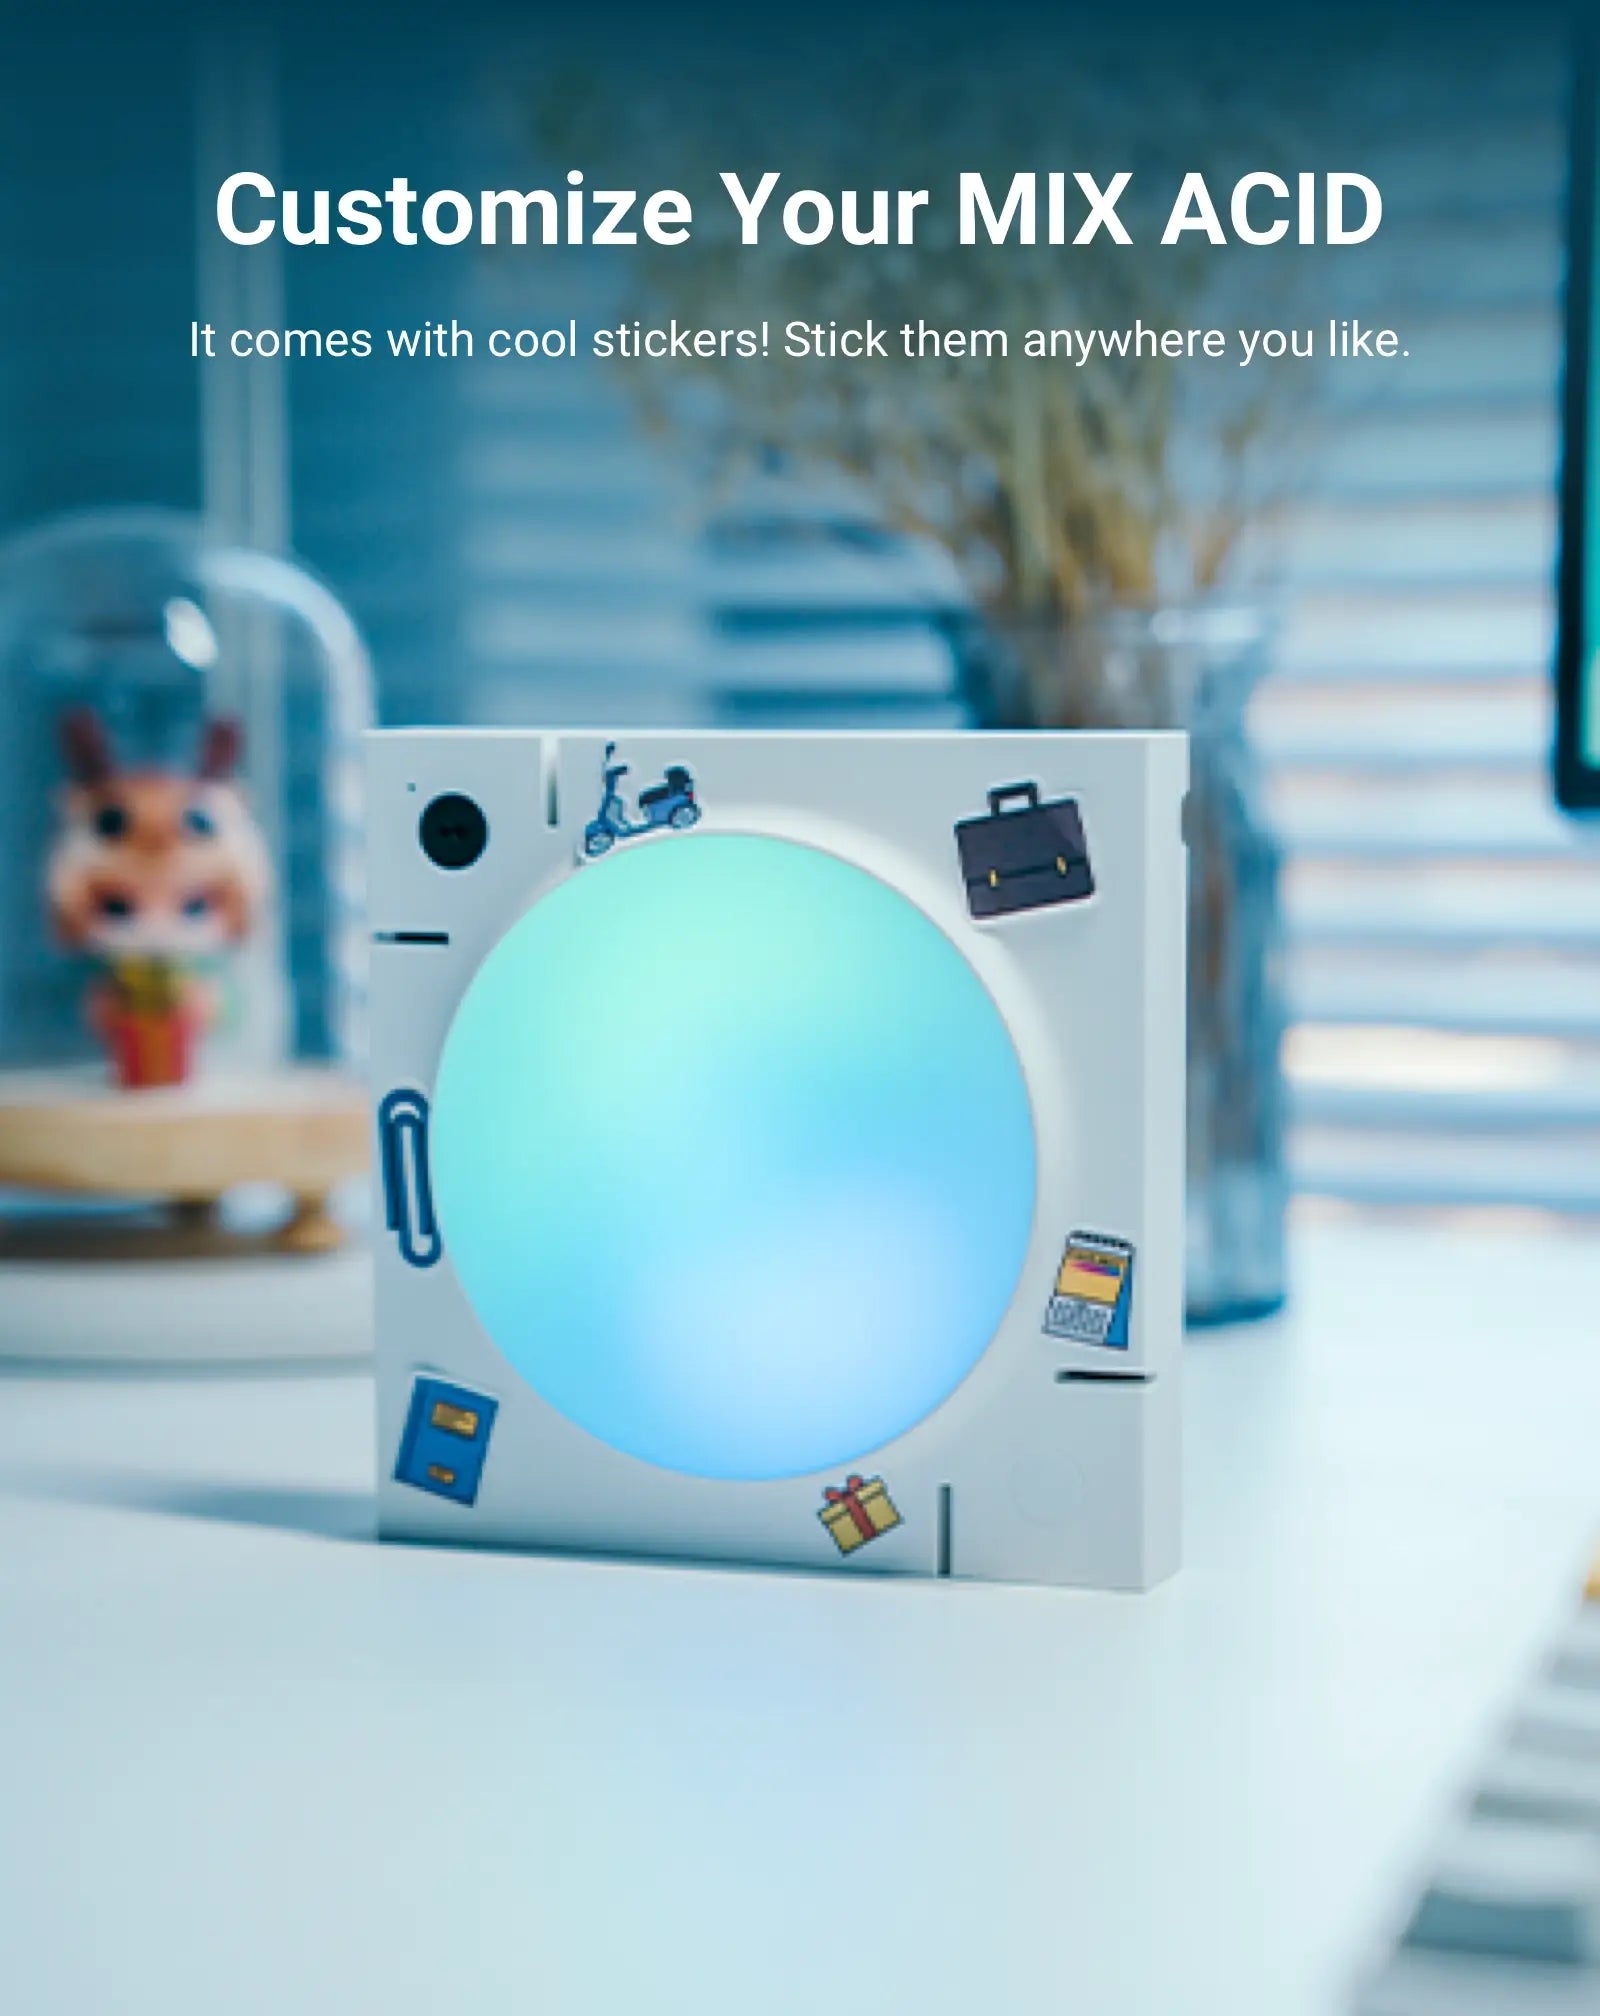 Customize Your MIX ACID It comes with cool stickers! Stick them anywhere you like.